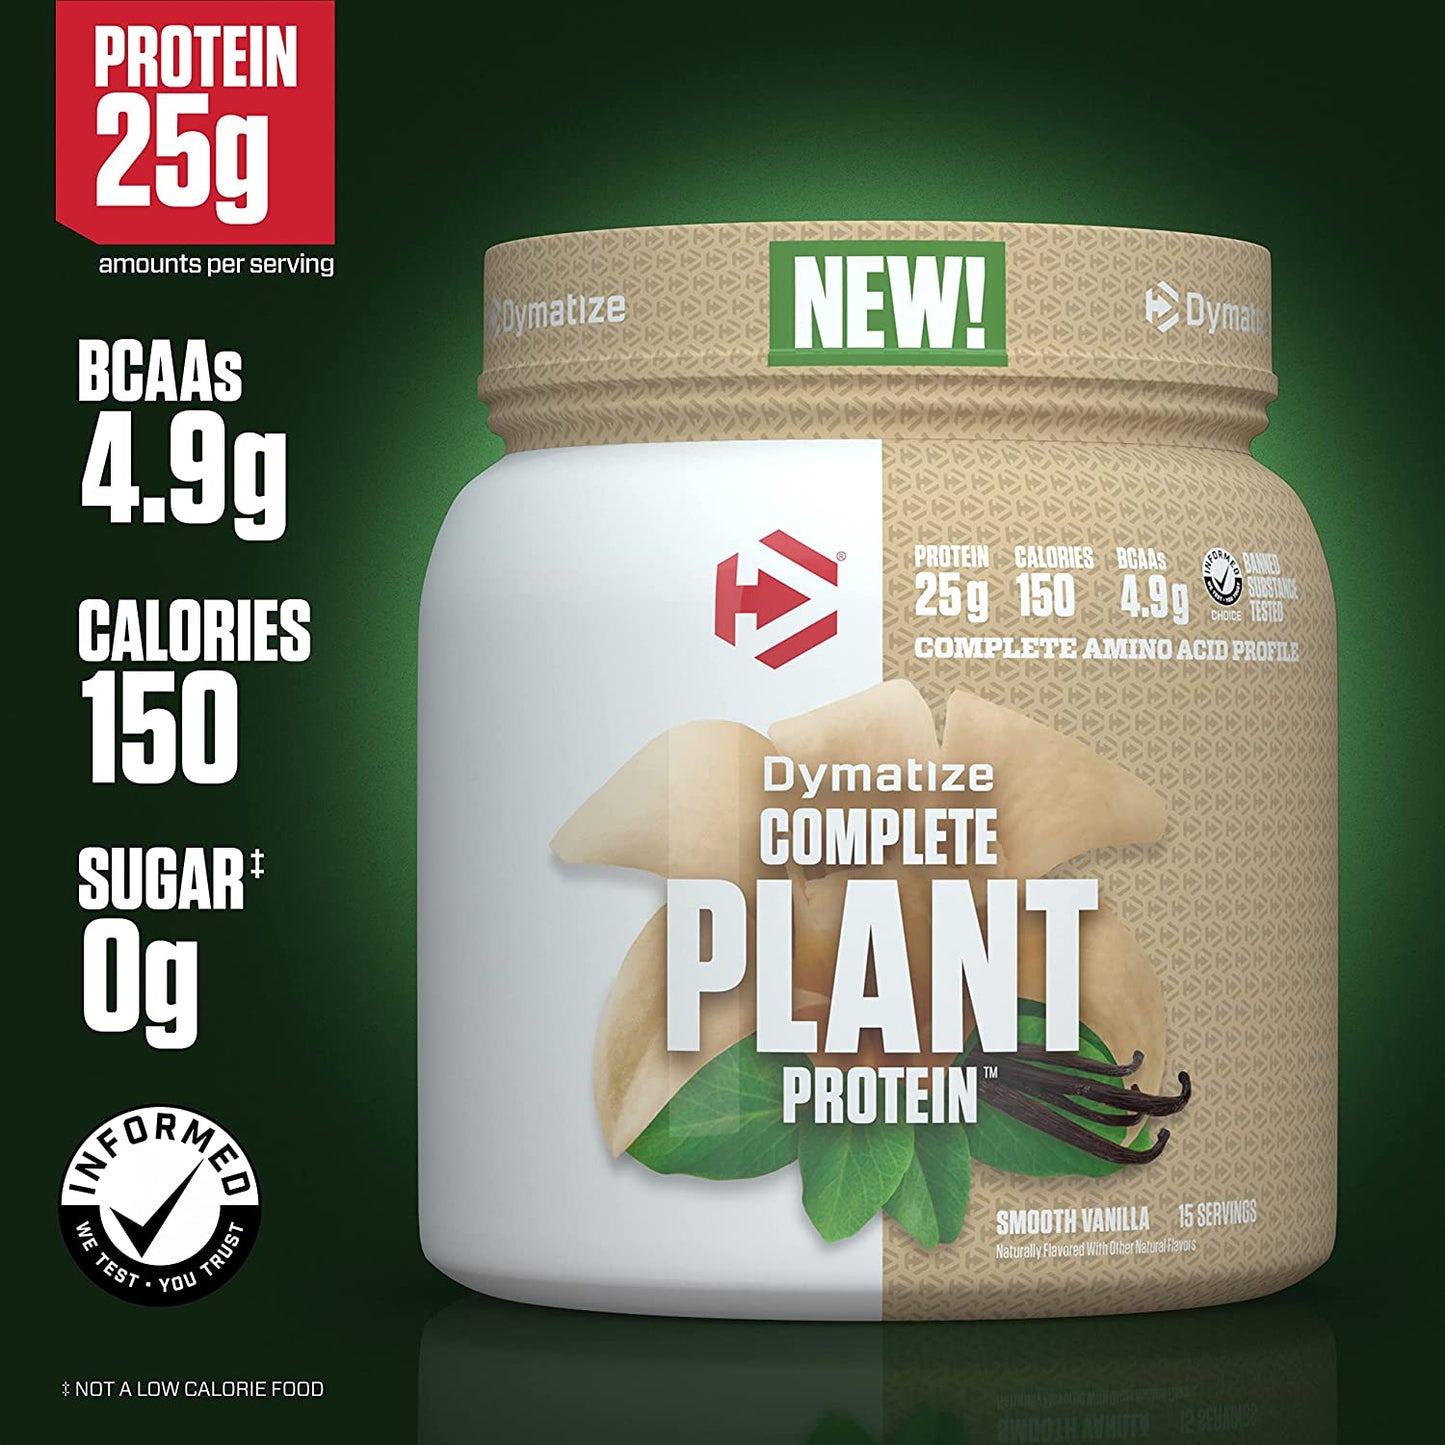 Dymatize Complete Plant Protein oh